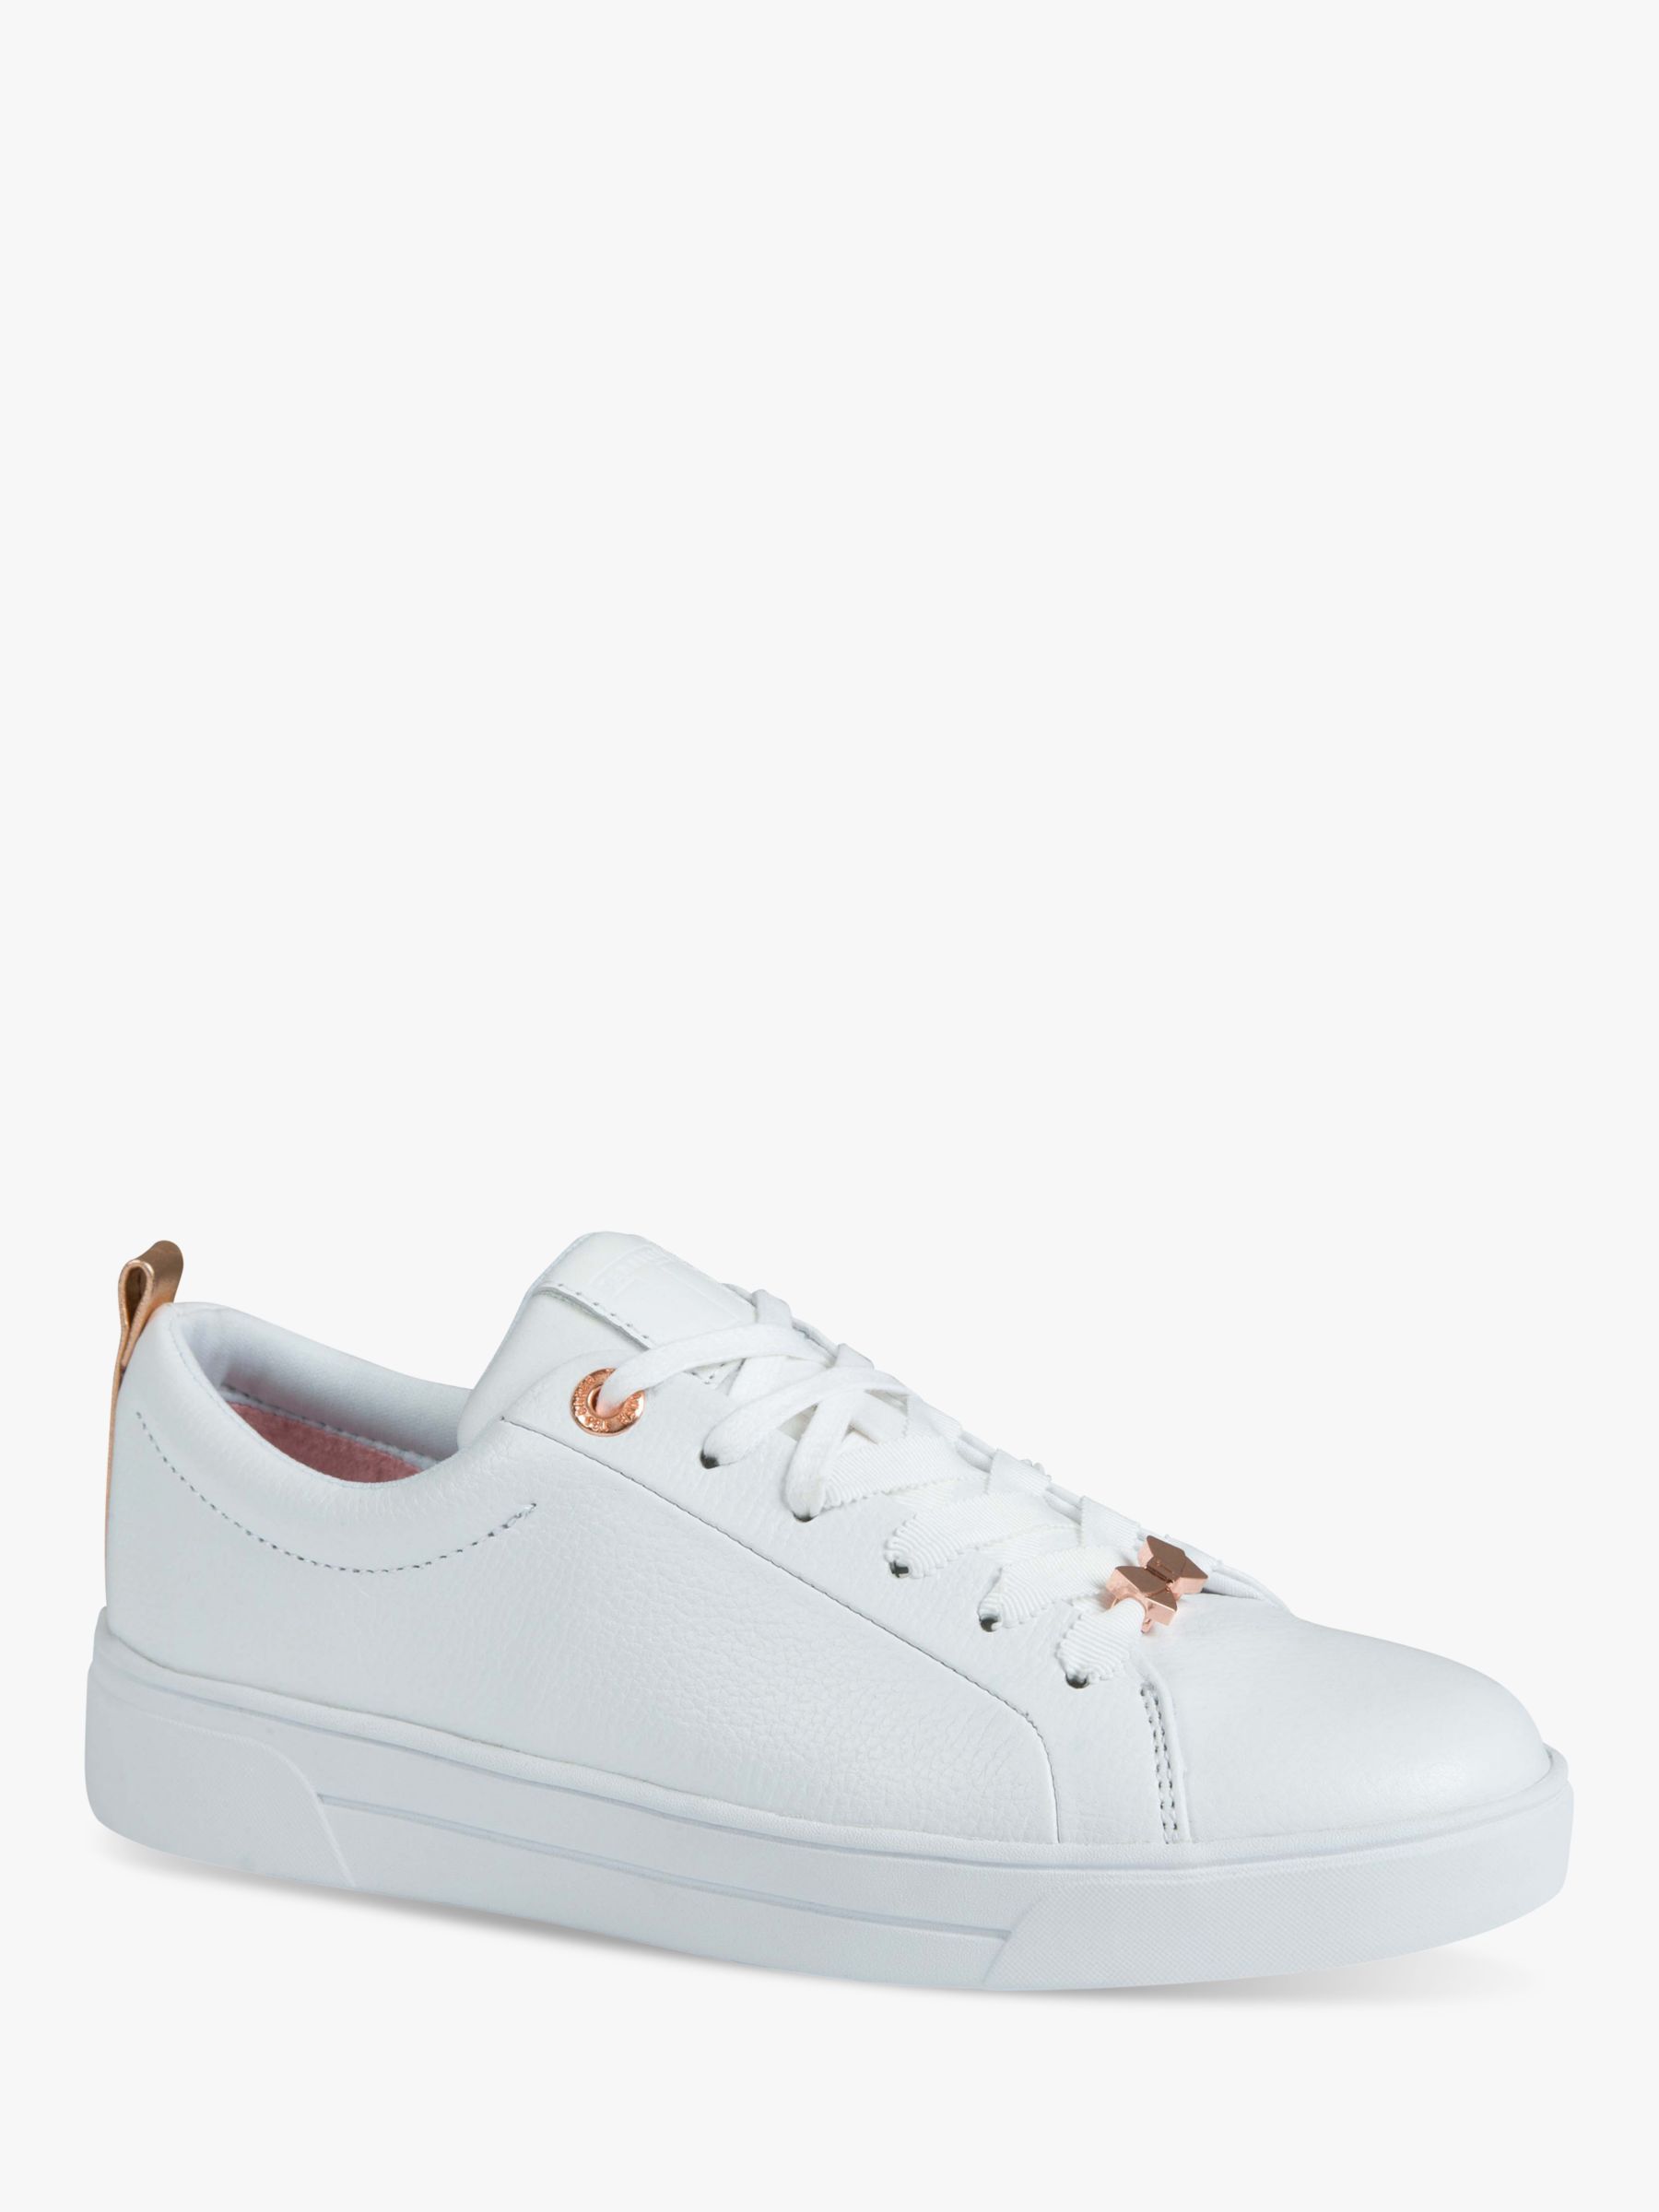 Ted Baker Gielli Lace Up Trainers, White Leather/Textile at John Lewis \u0026  Partners